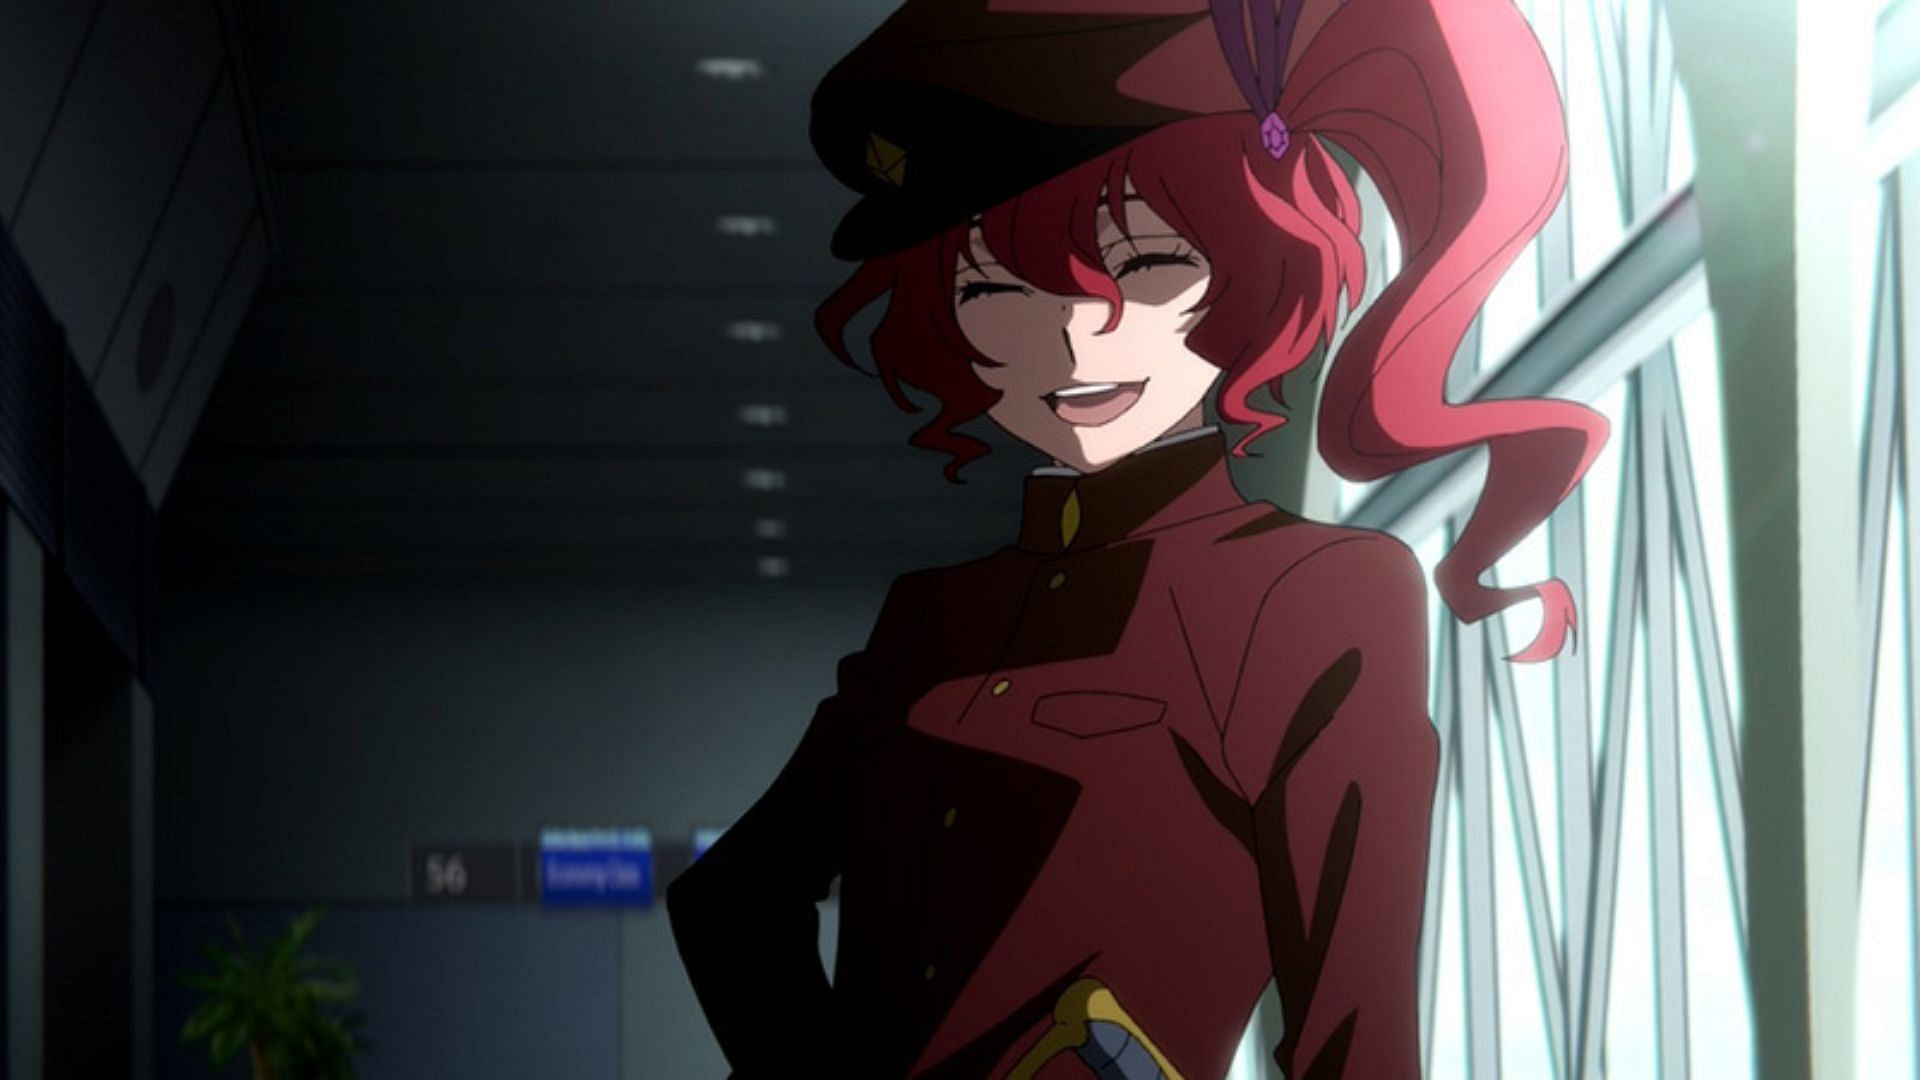 Bungo Stray Dogs season 5 episode 11 review: Dazai survives as Fukuchi  meets his tragic fate at the hands of a close one